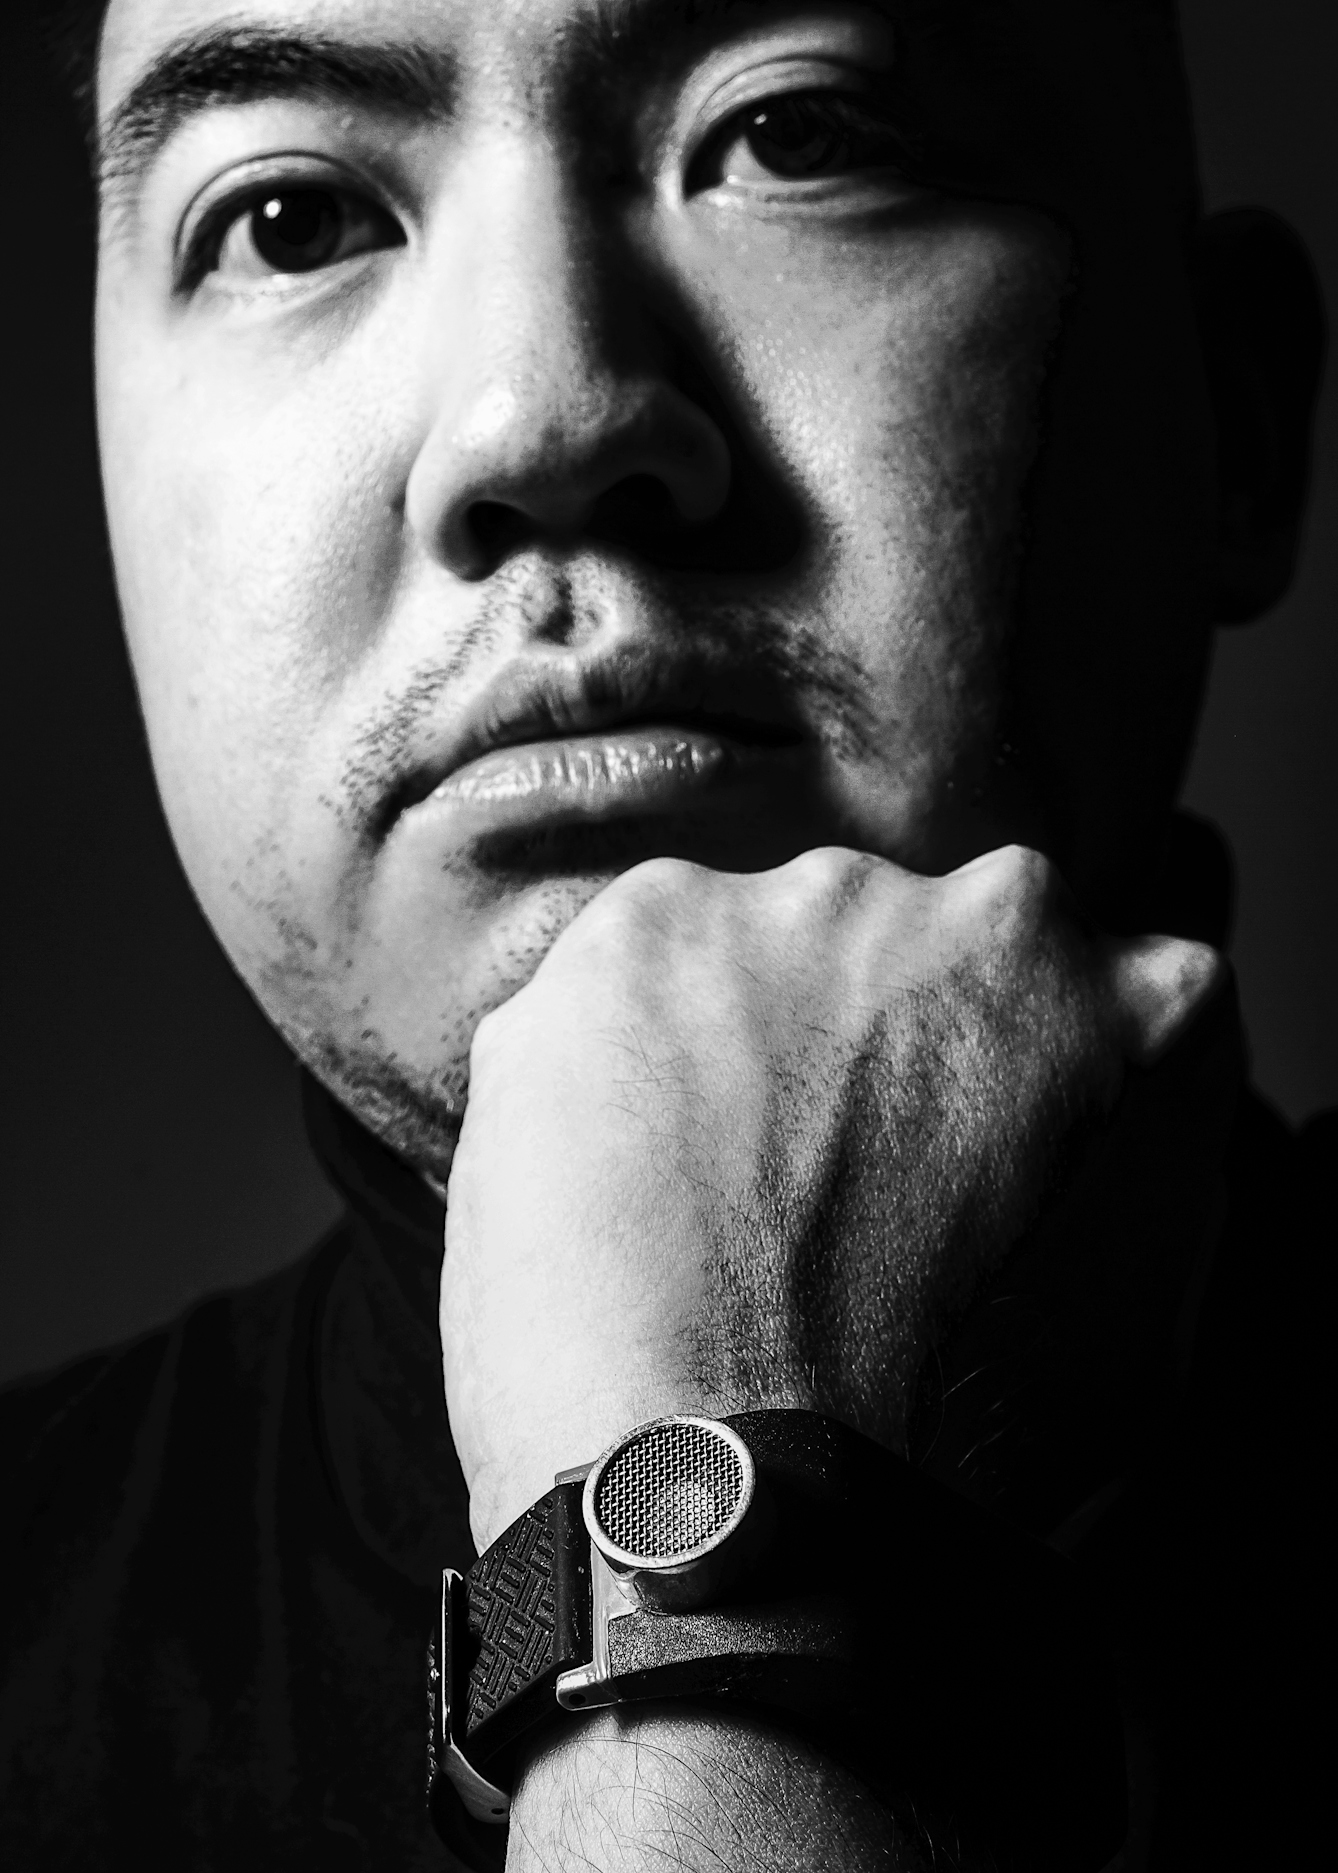 Black and white photographic portrait of a close-up of a man's face looking straight to camra. His chin is resting on his left hand. Around his wrist is a circular device with a mesh front attached to a wide leather strap, it is not a watch. The man's face and hand are spotlit in a small circle of light. He is pictured against a black background which means he is surrounded by darkness.